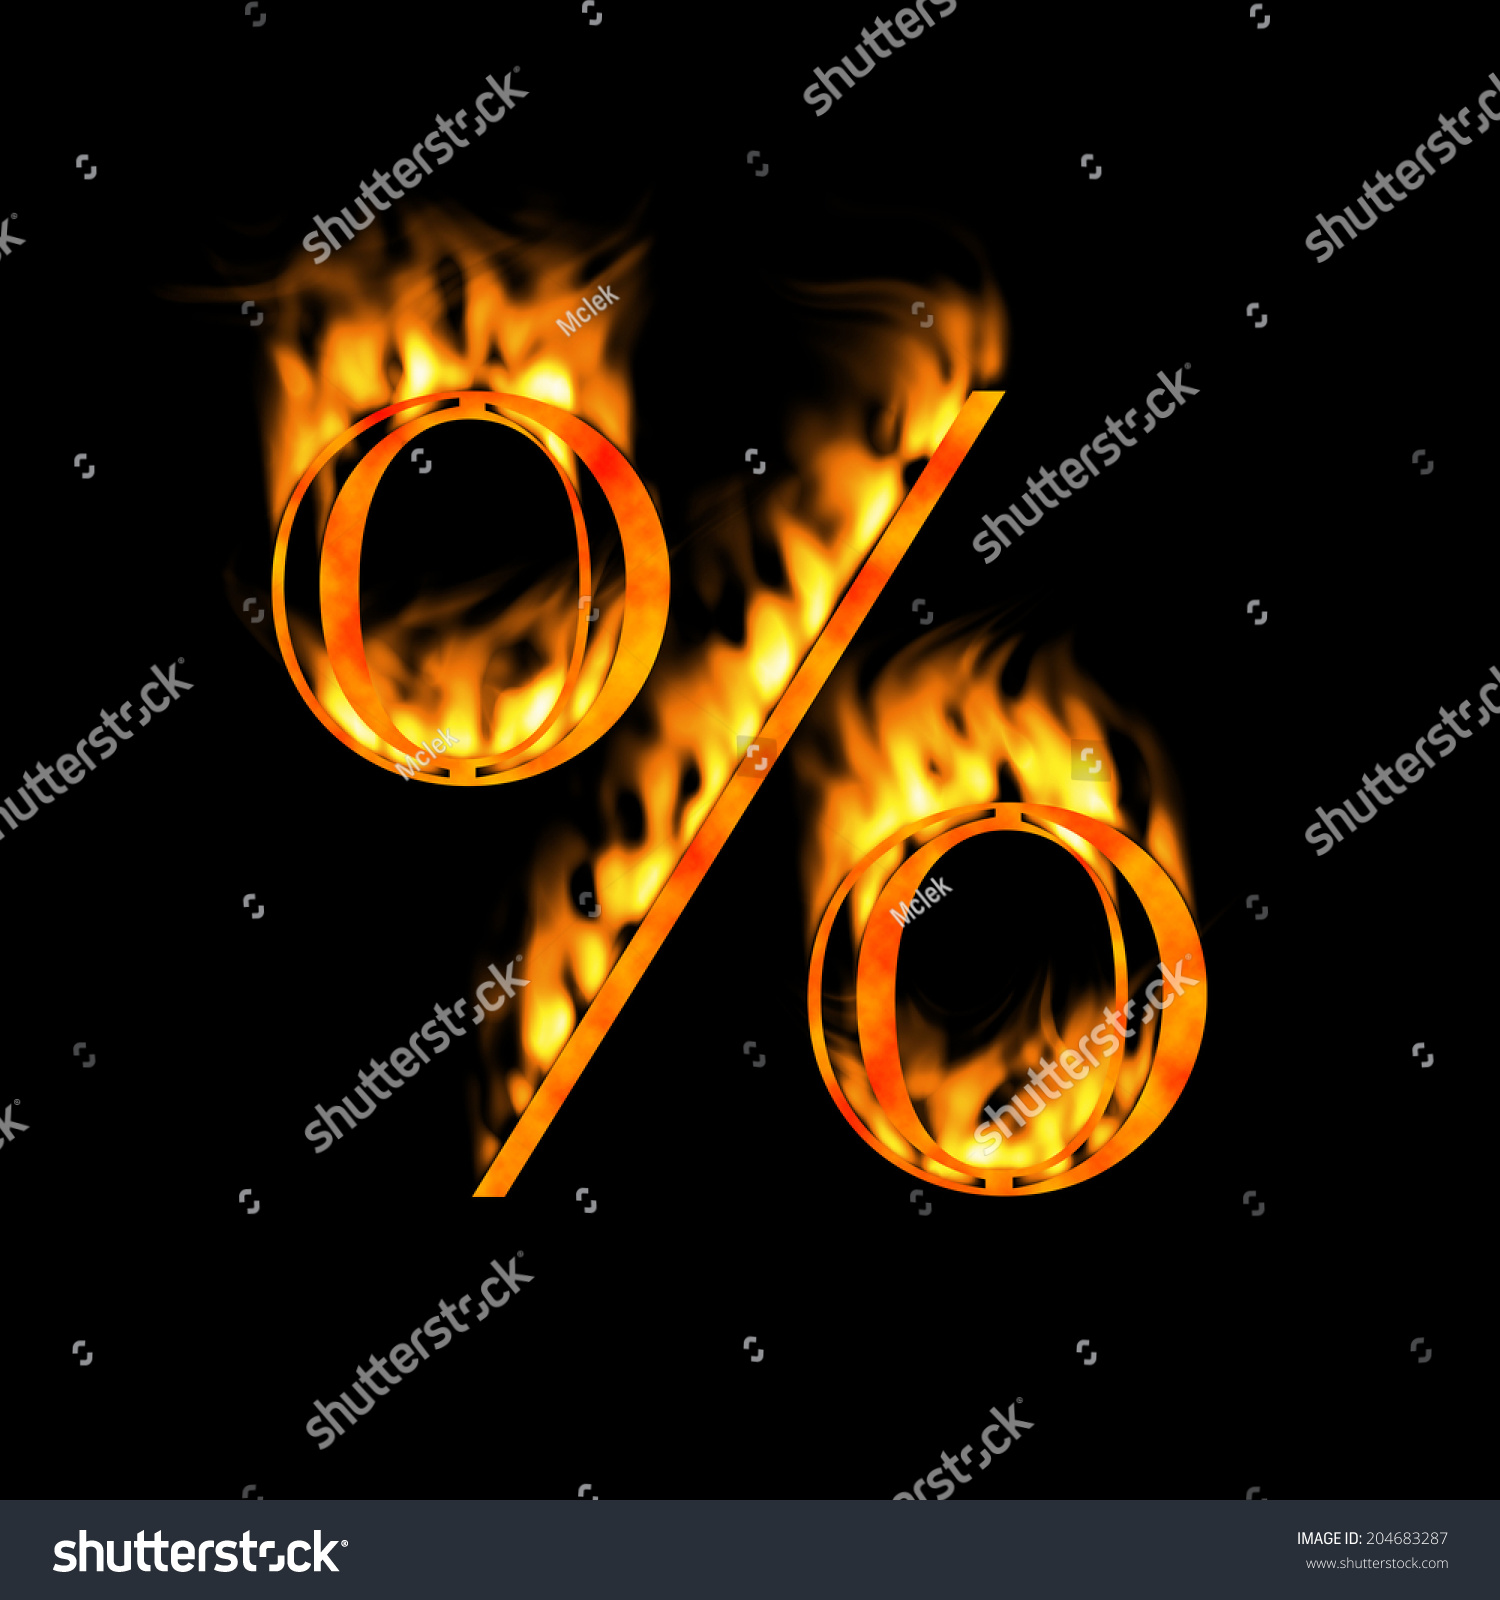 Percent % symbol. Fire alphabet letter isolated on black. Look for more symbols in my gallery. #204683287